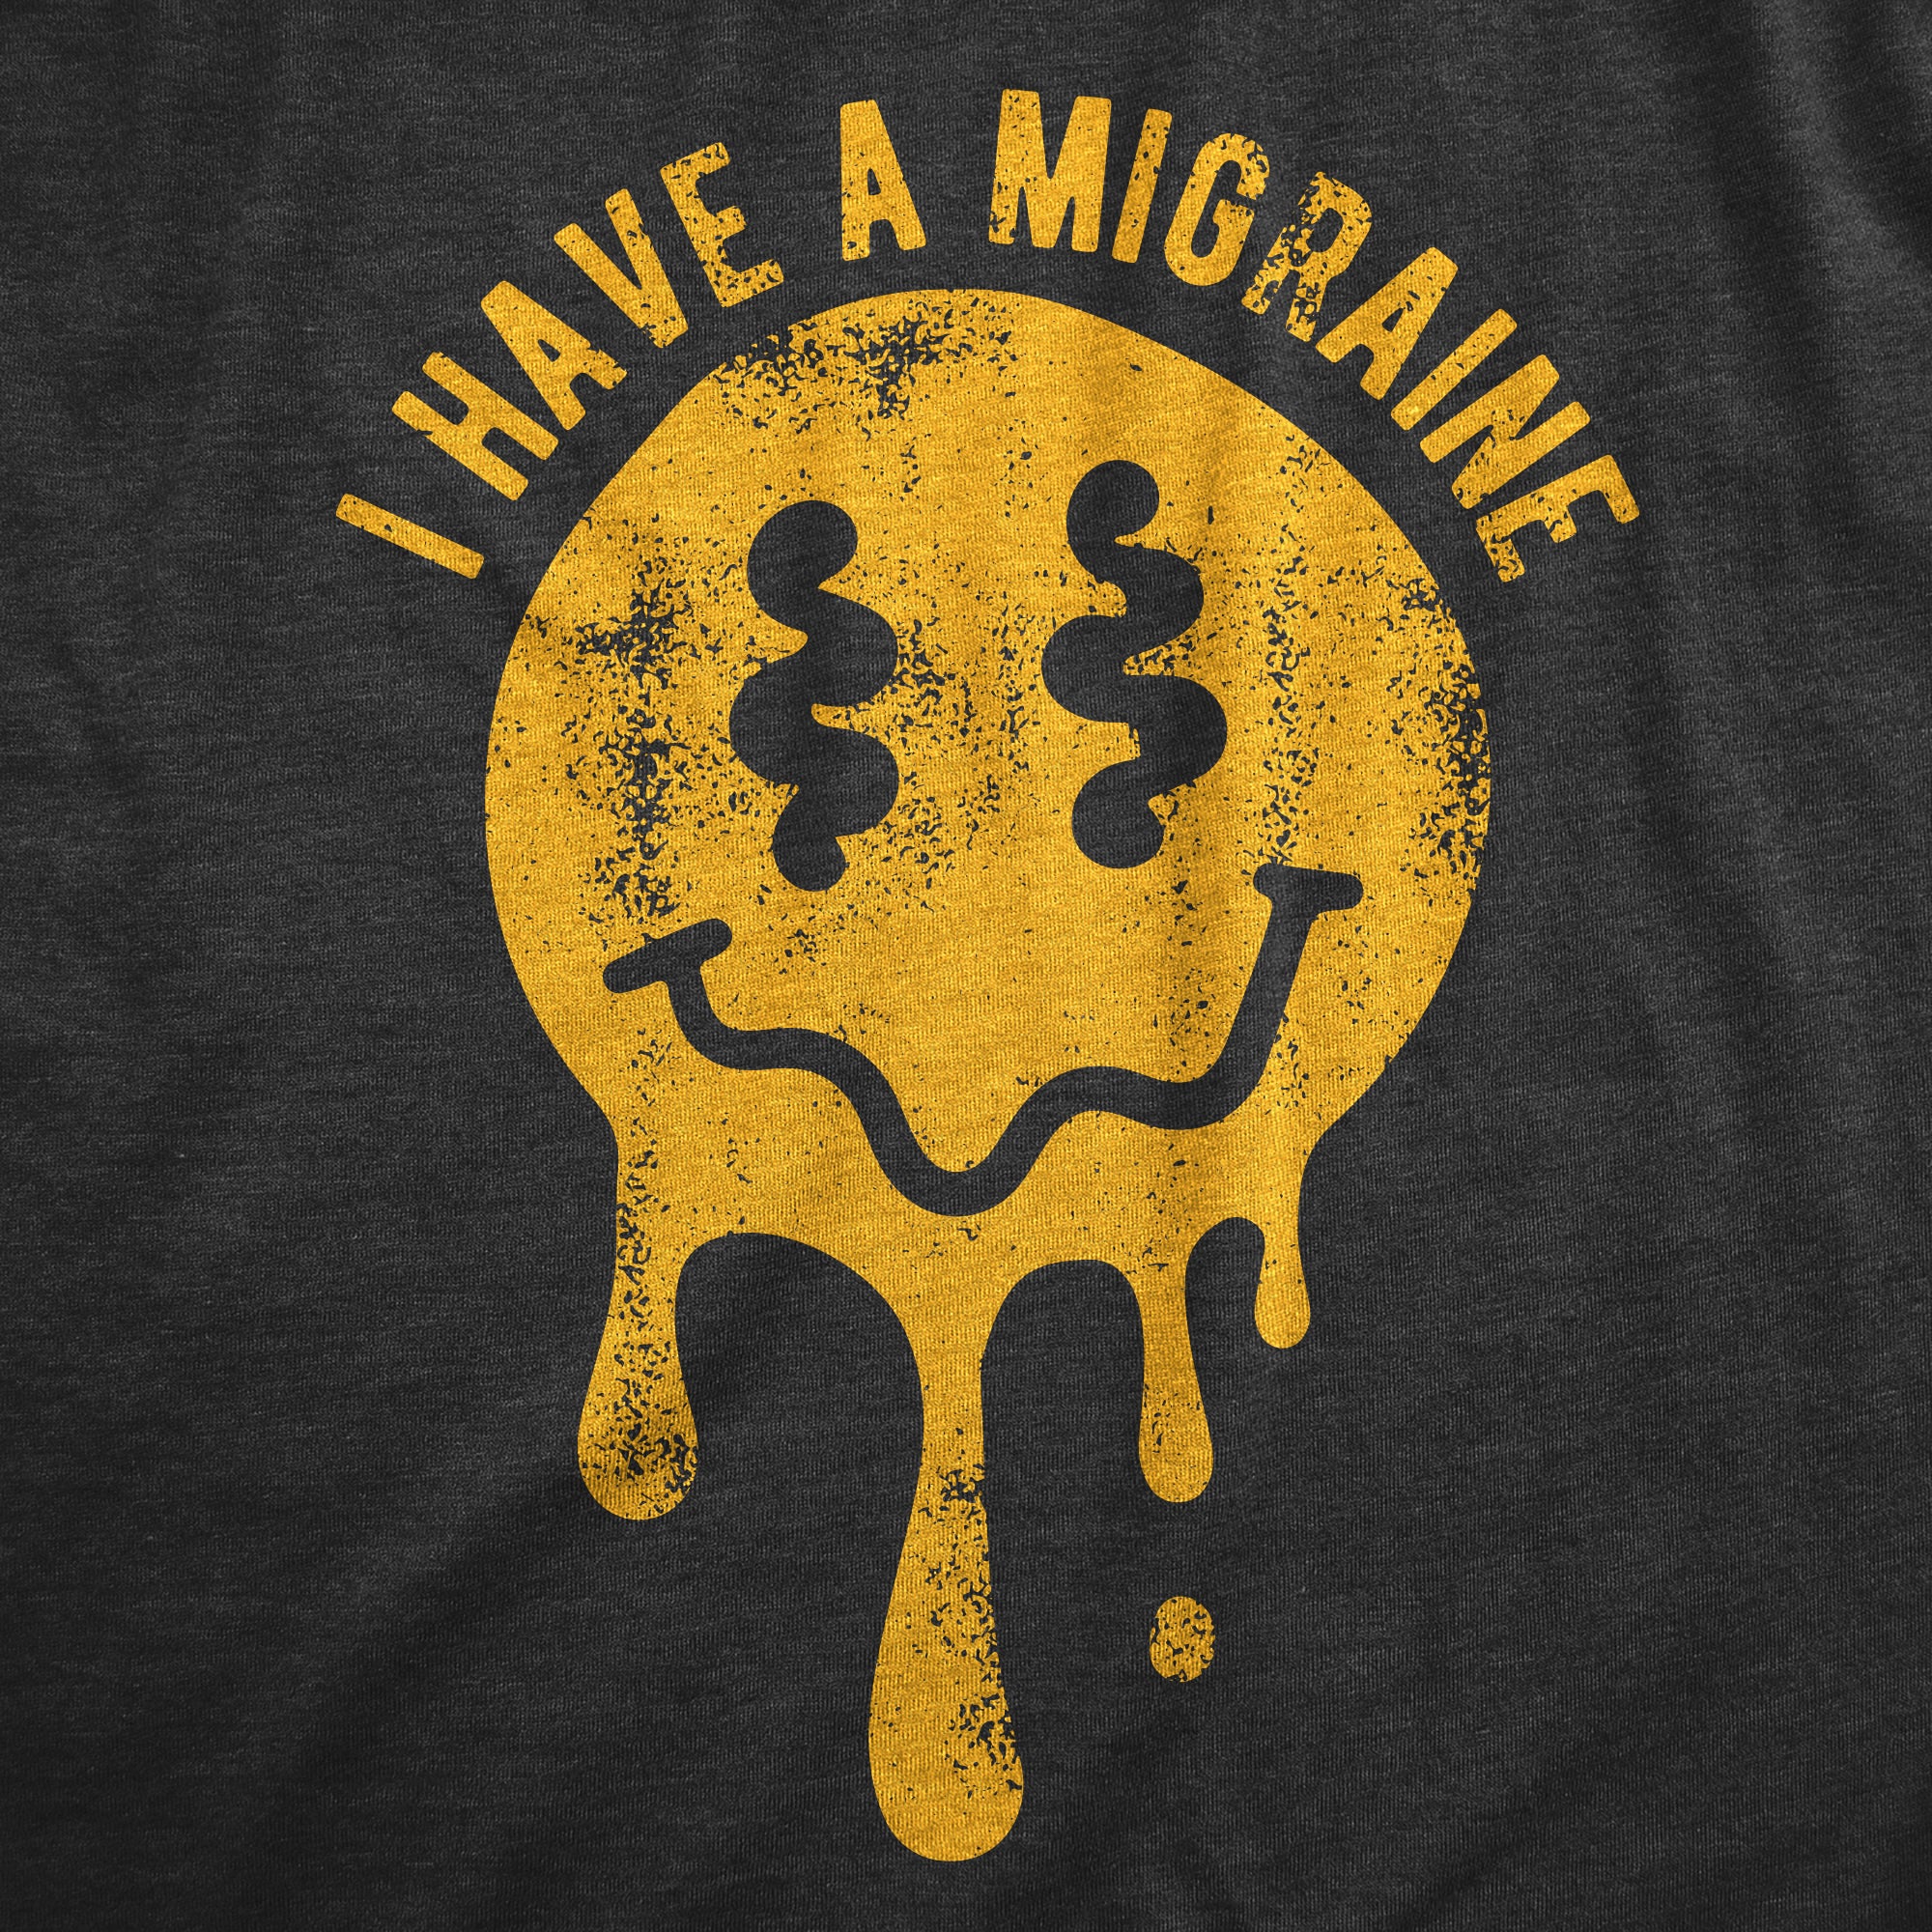 Funny Heather Black - MIGRAINE I Have A Migraine Womens T Shirt Nerdy Sarcastic Tee